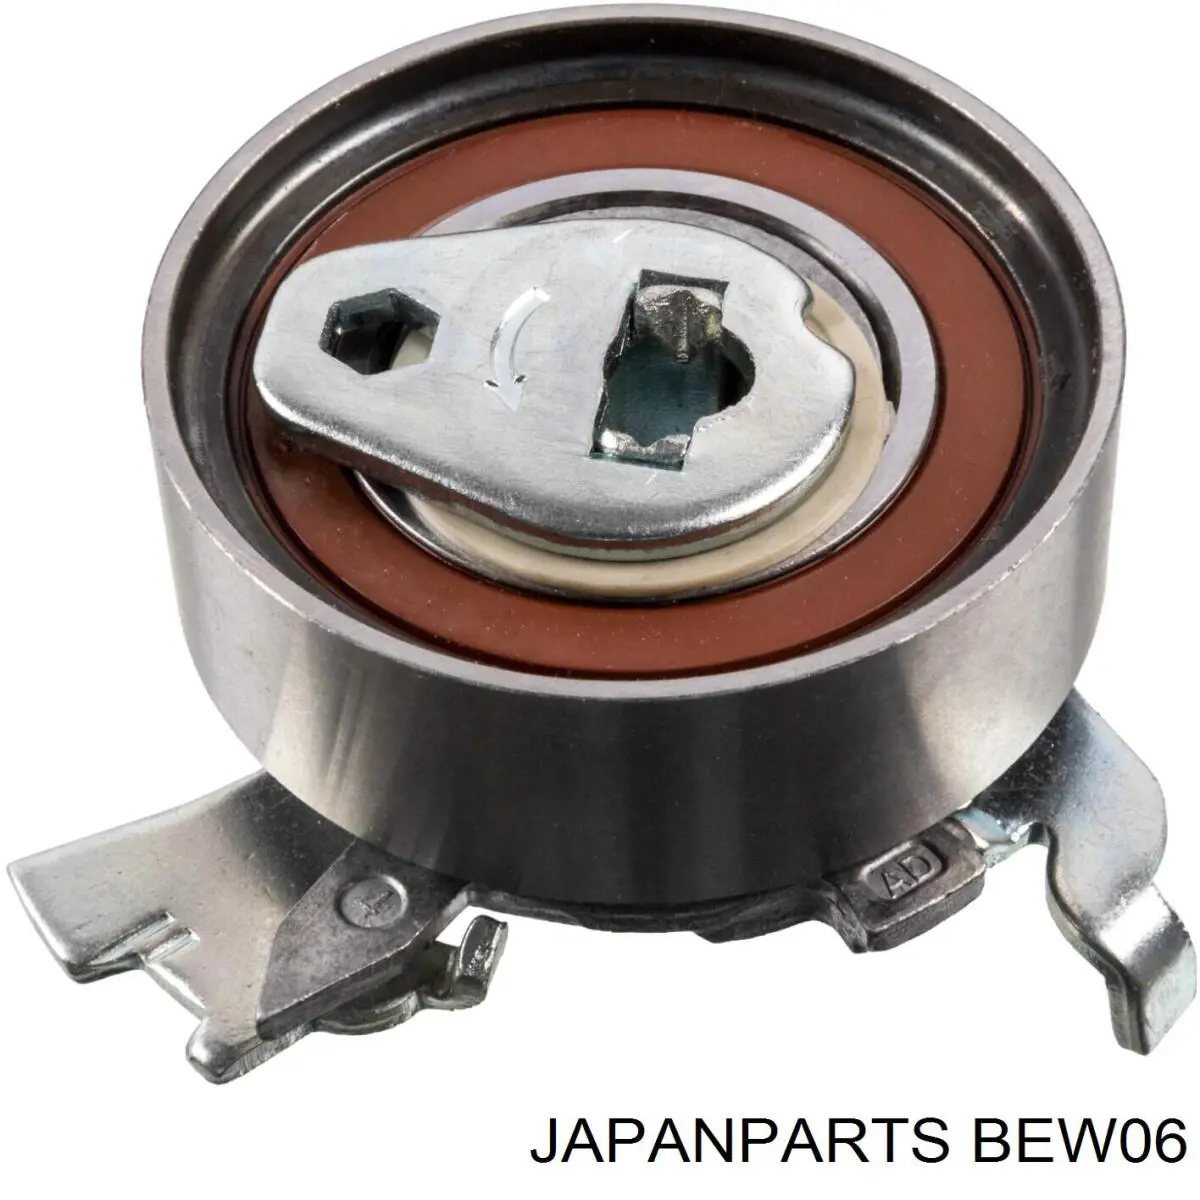 BE-W06 Japan Parts ролик грм